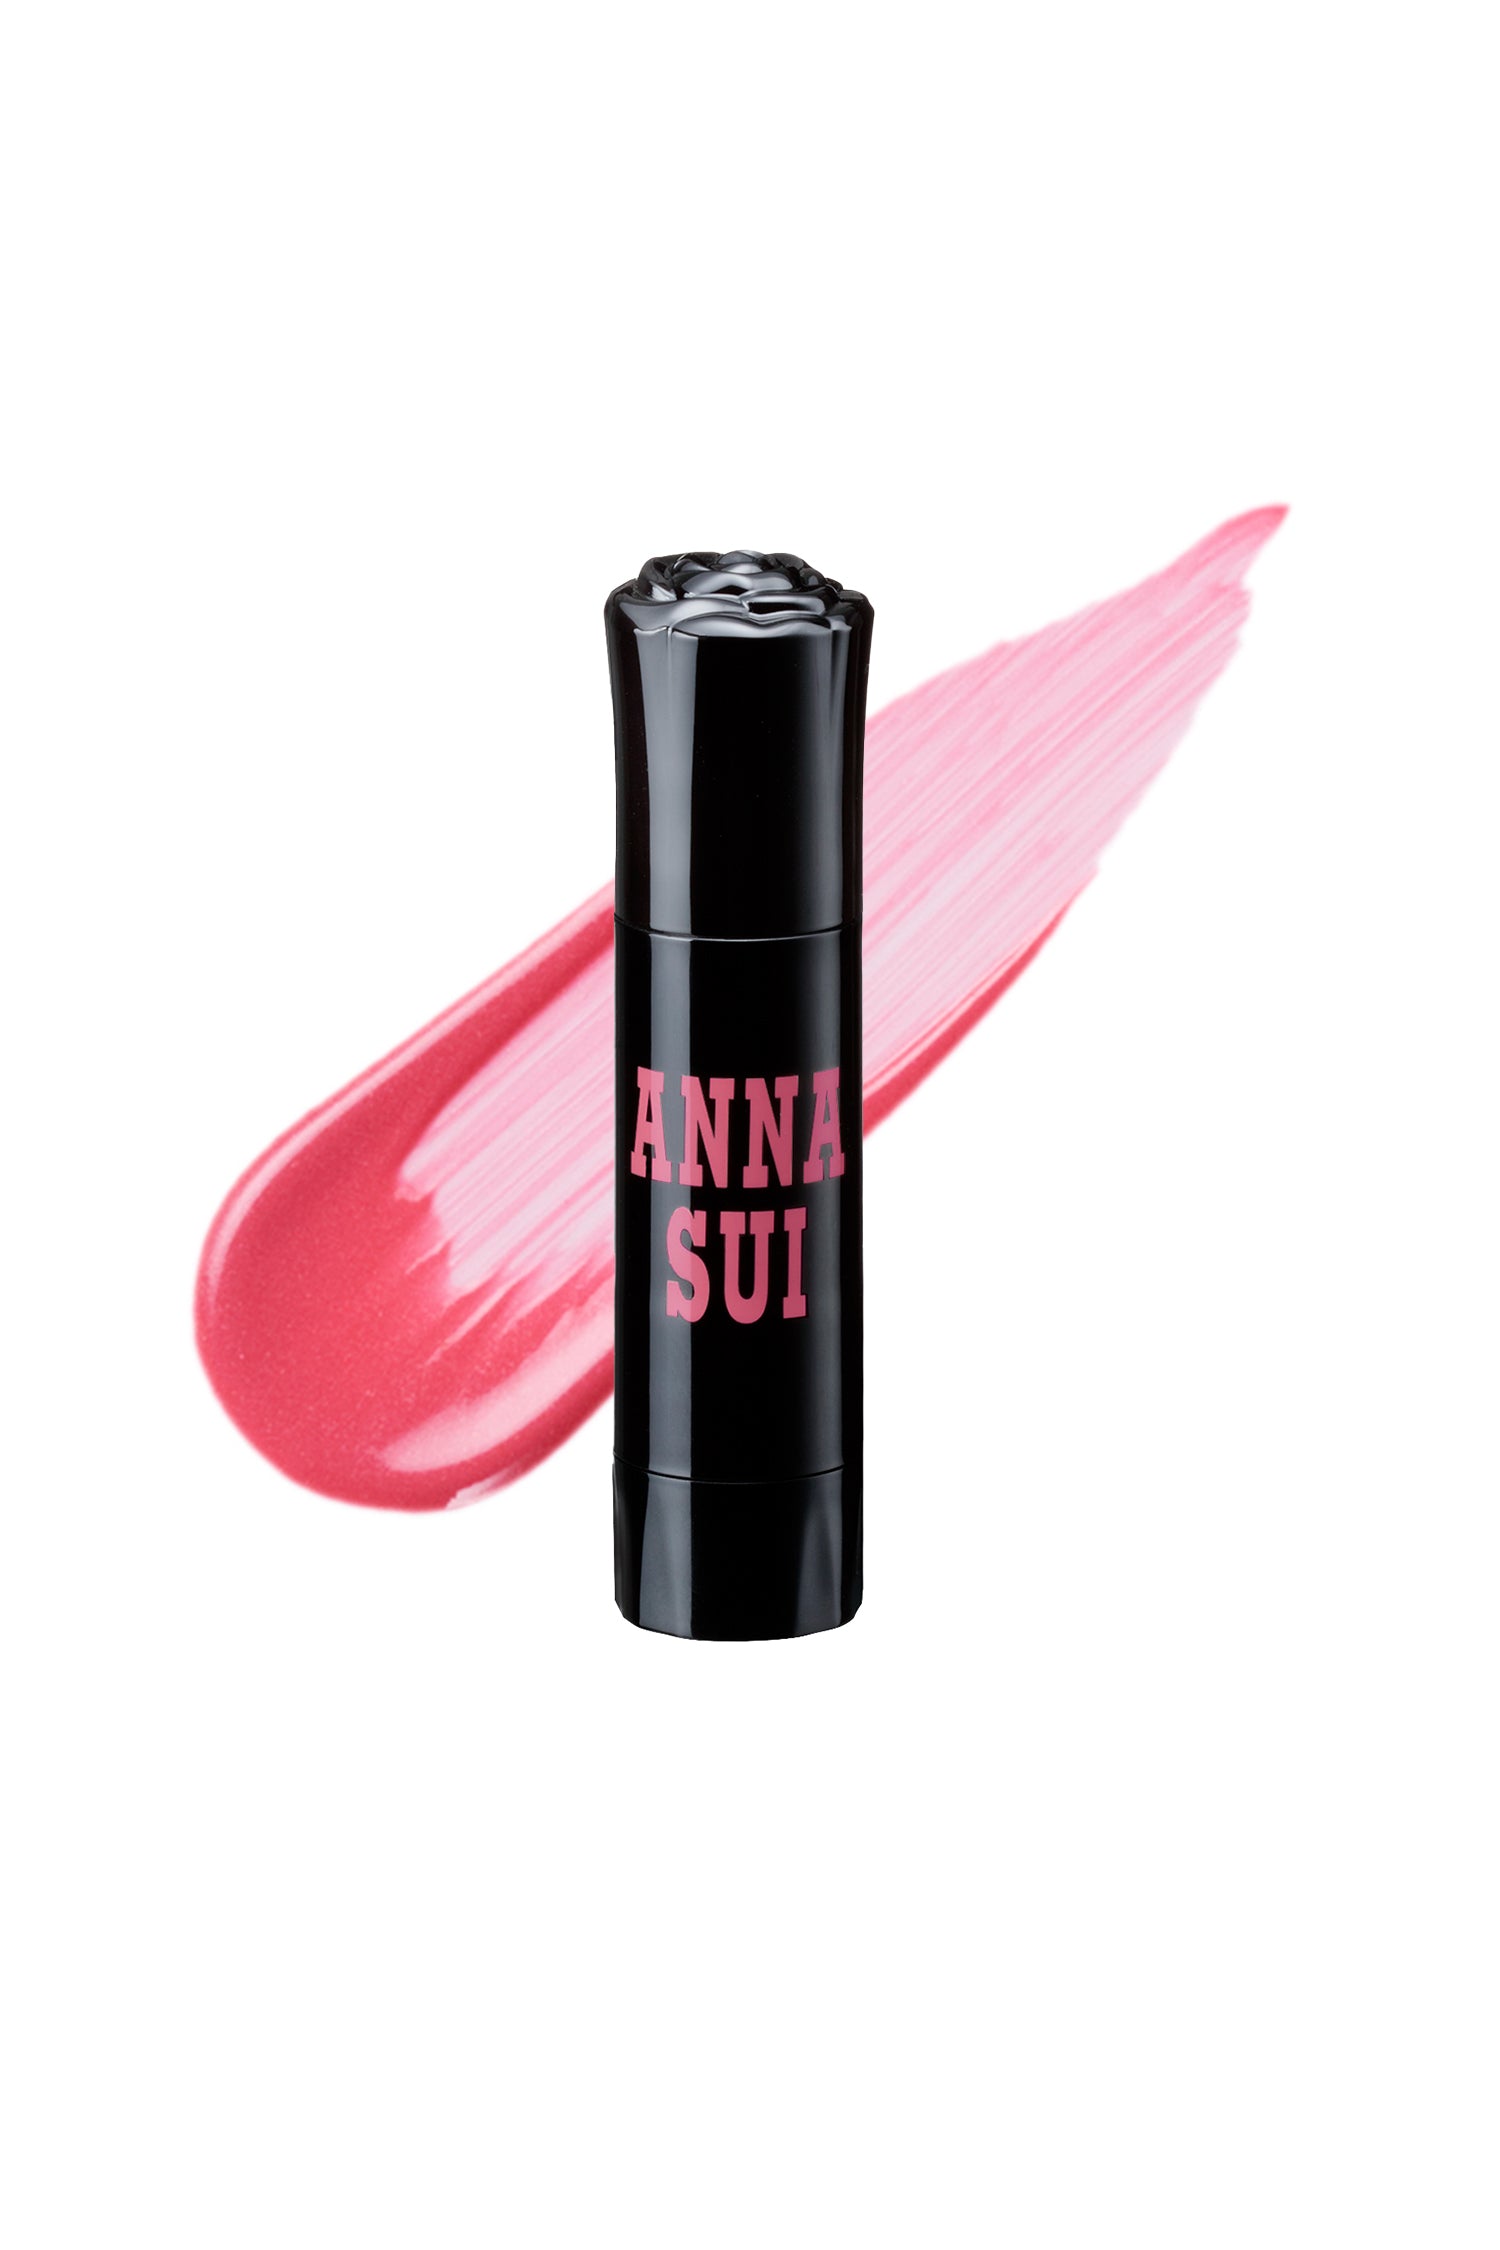 ROSE - Anna Sui color match the product on cylinder case with a rose on top 